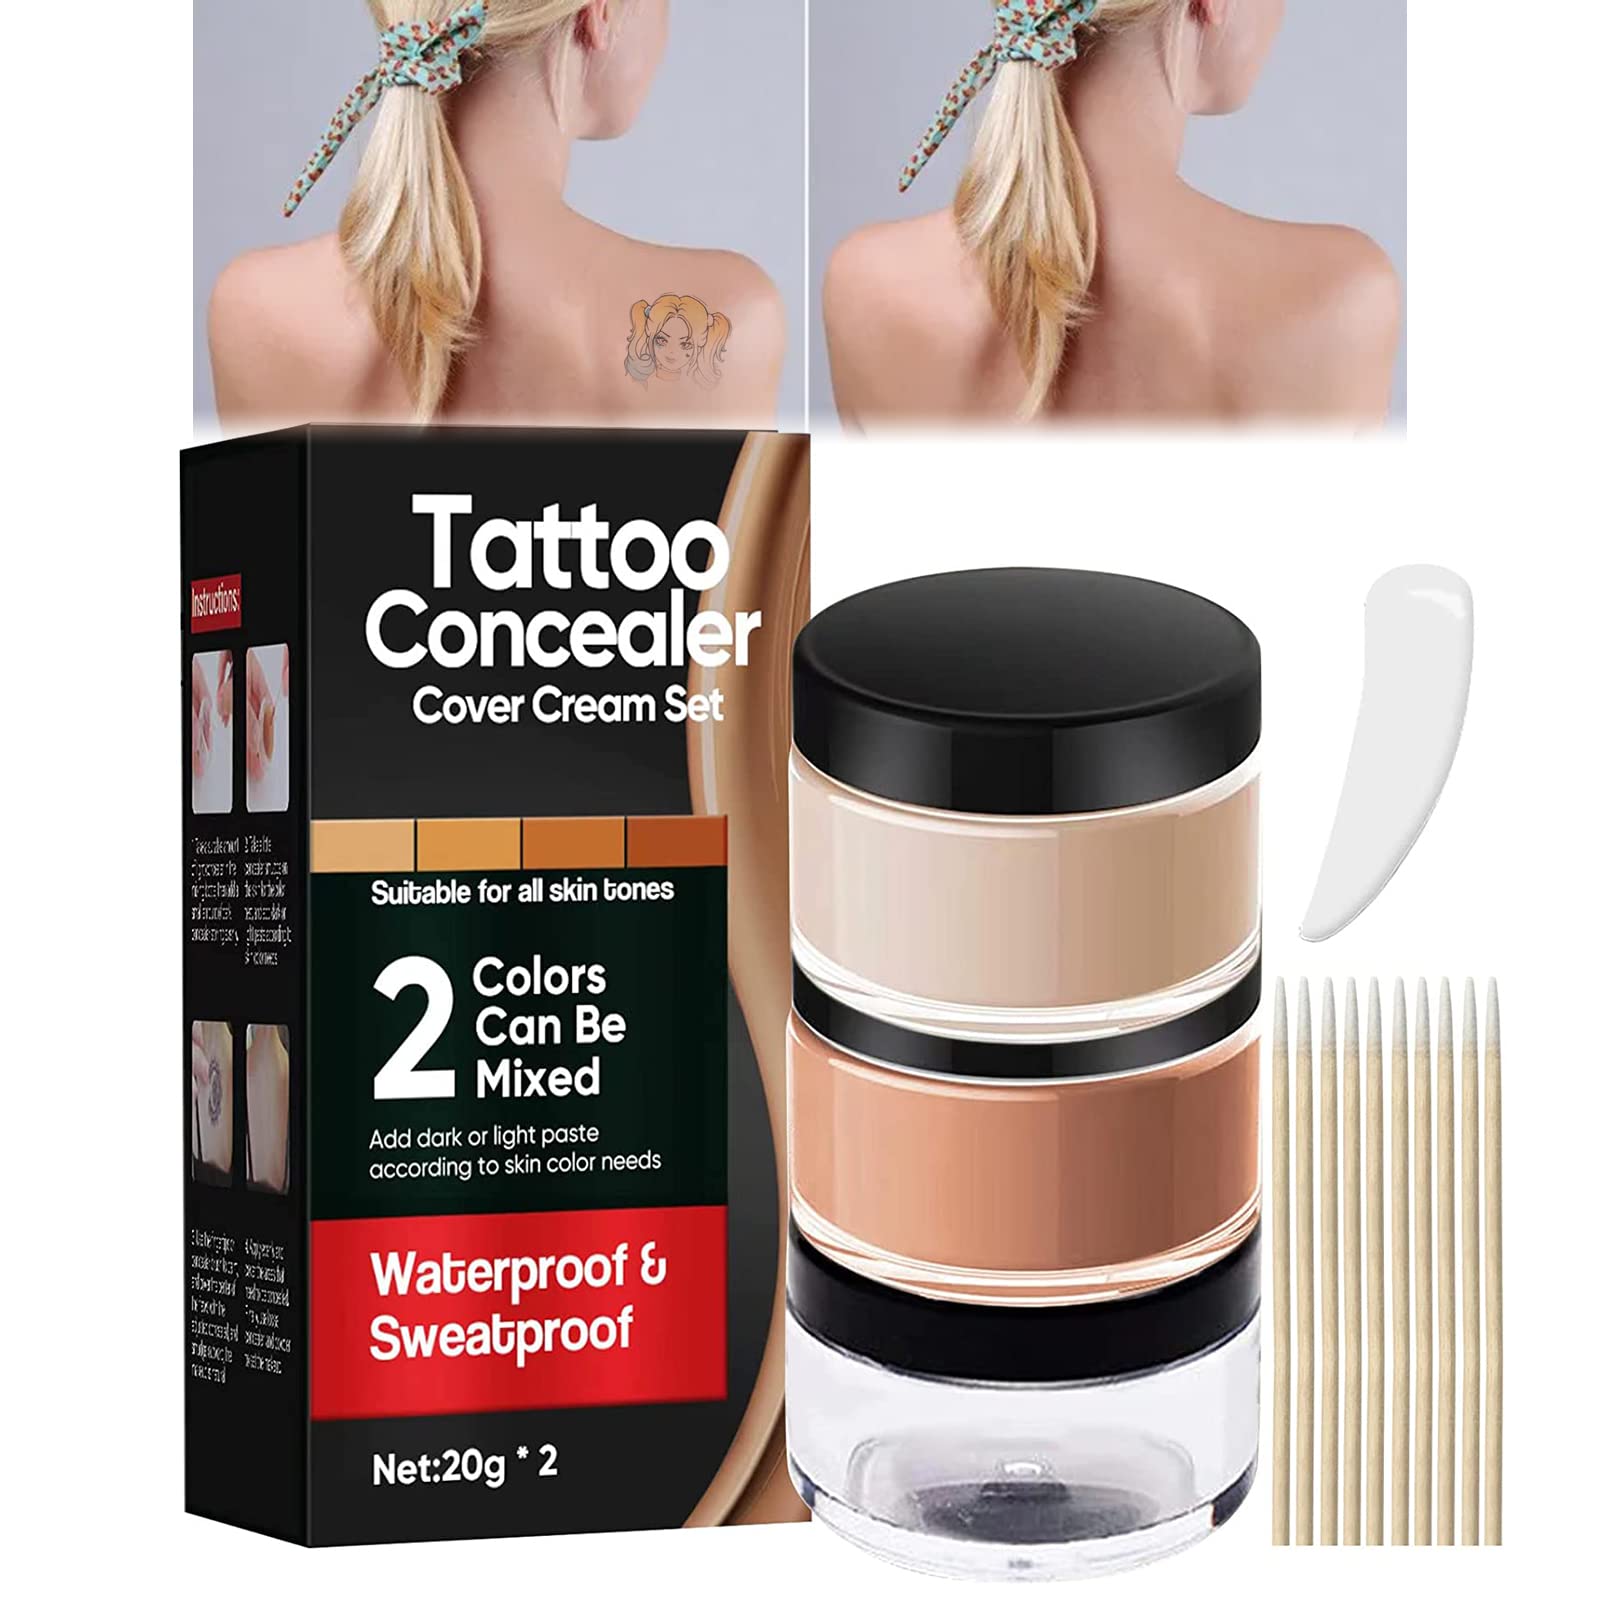 Covering a Tattoo With Makeup, From Prep to Finish